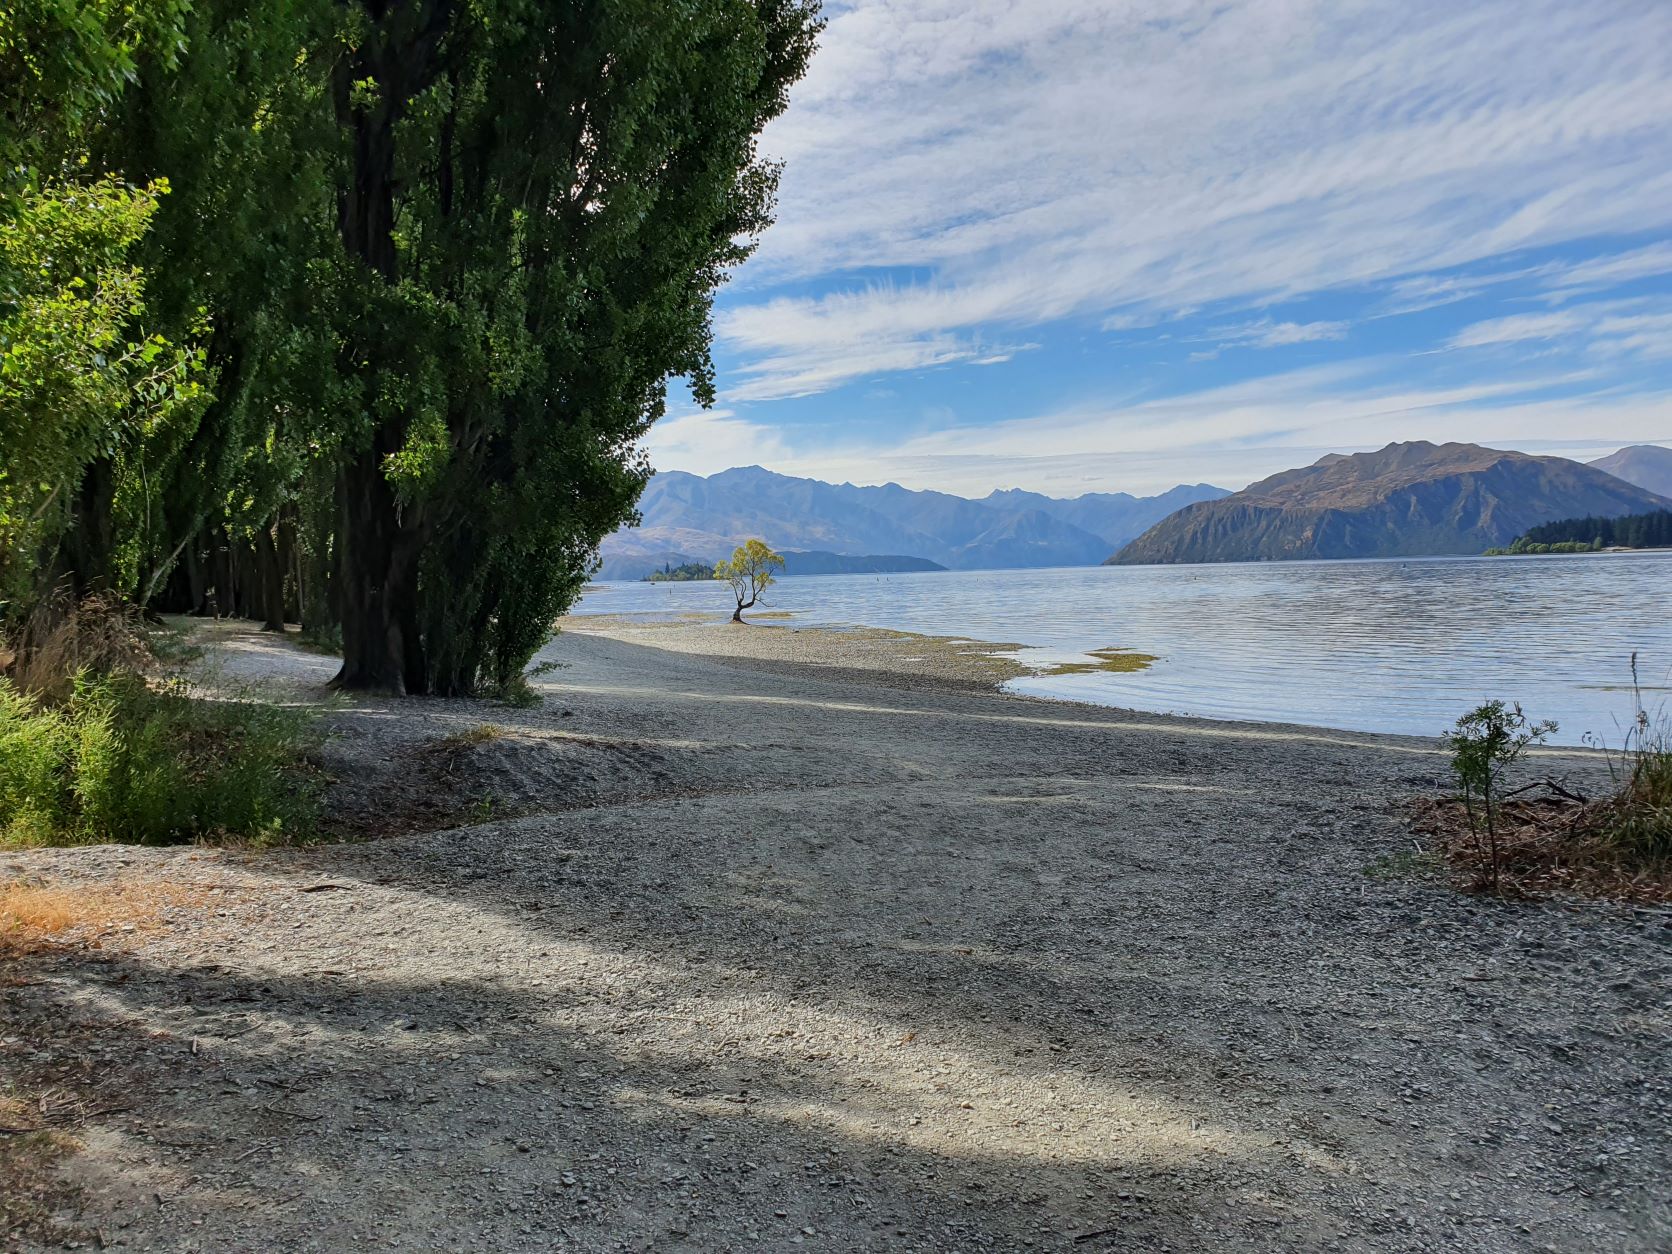 A view of Lake Wanaka from the shores